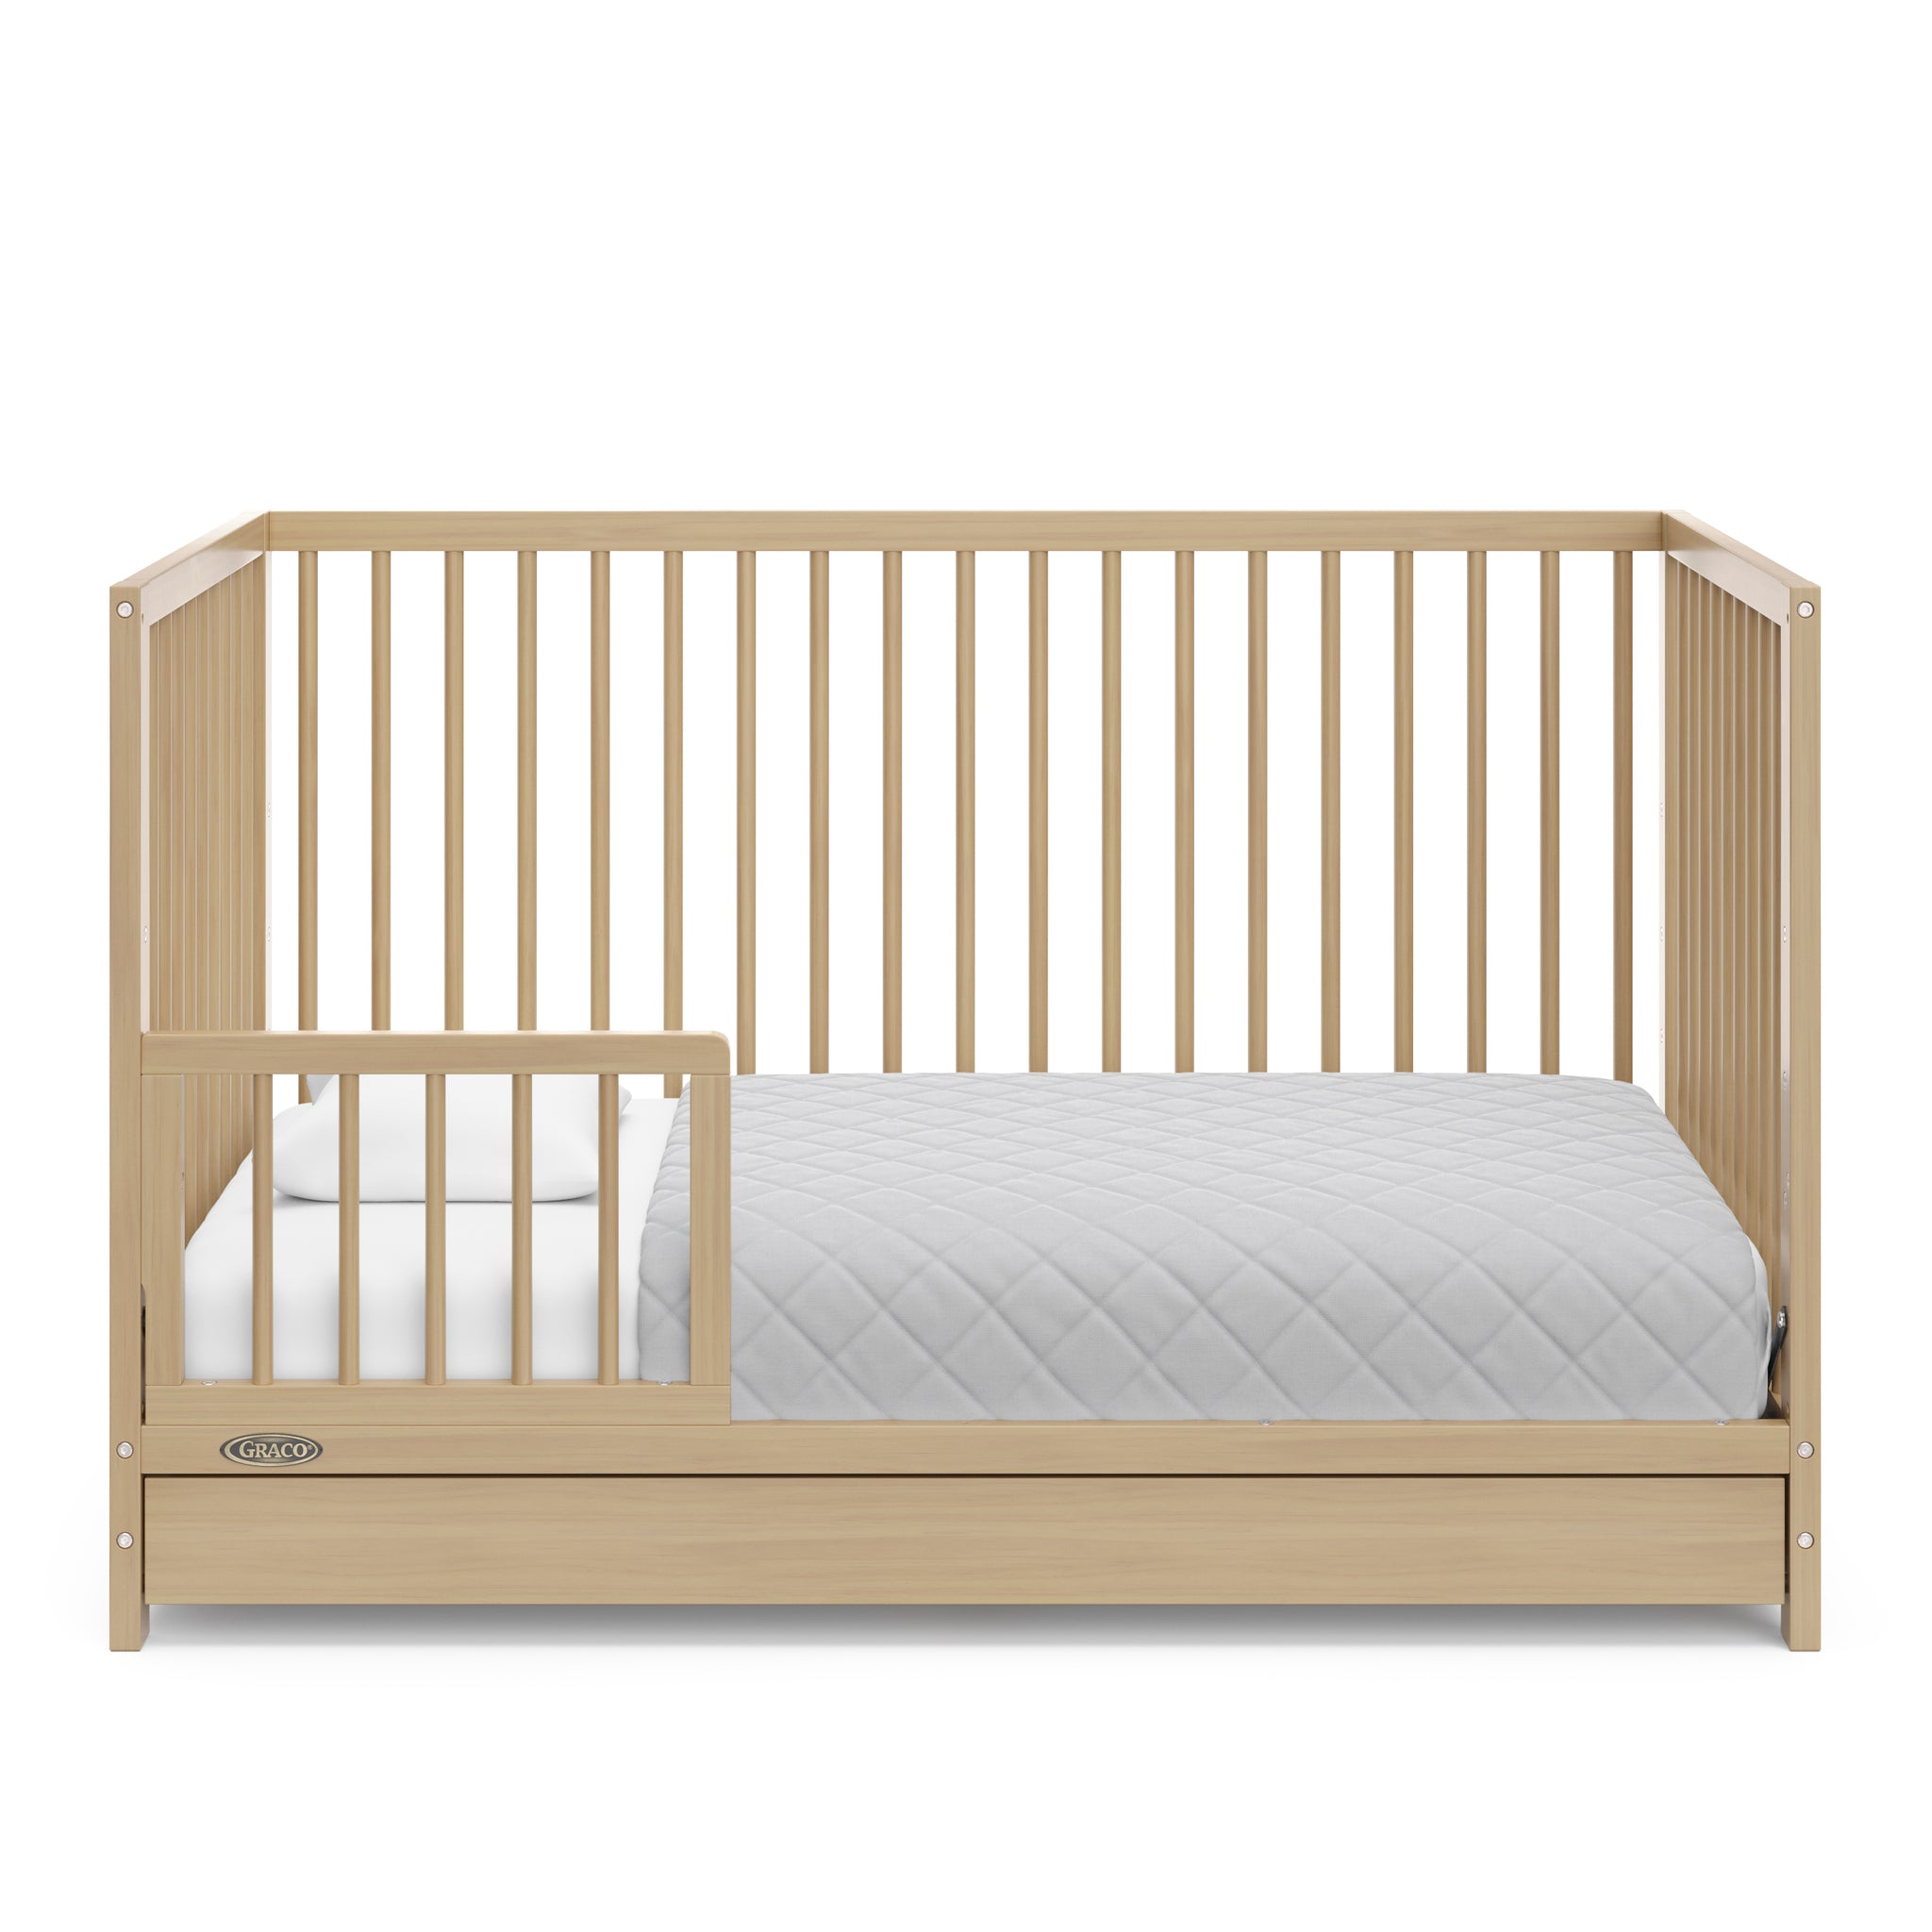 Driftwood crib with drawer in toddler bed conversion with one safety guardrail